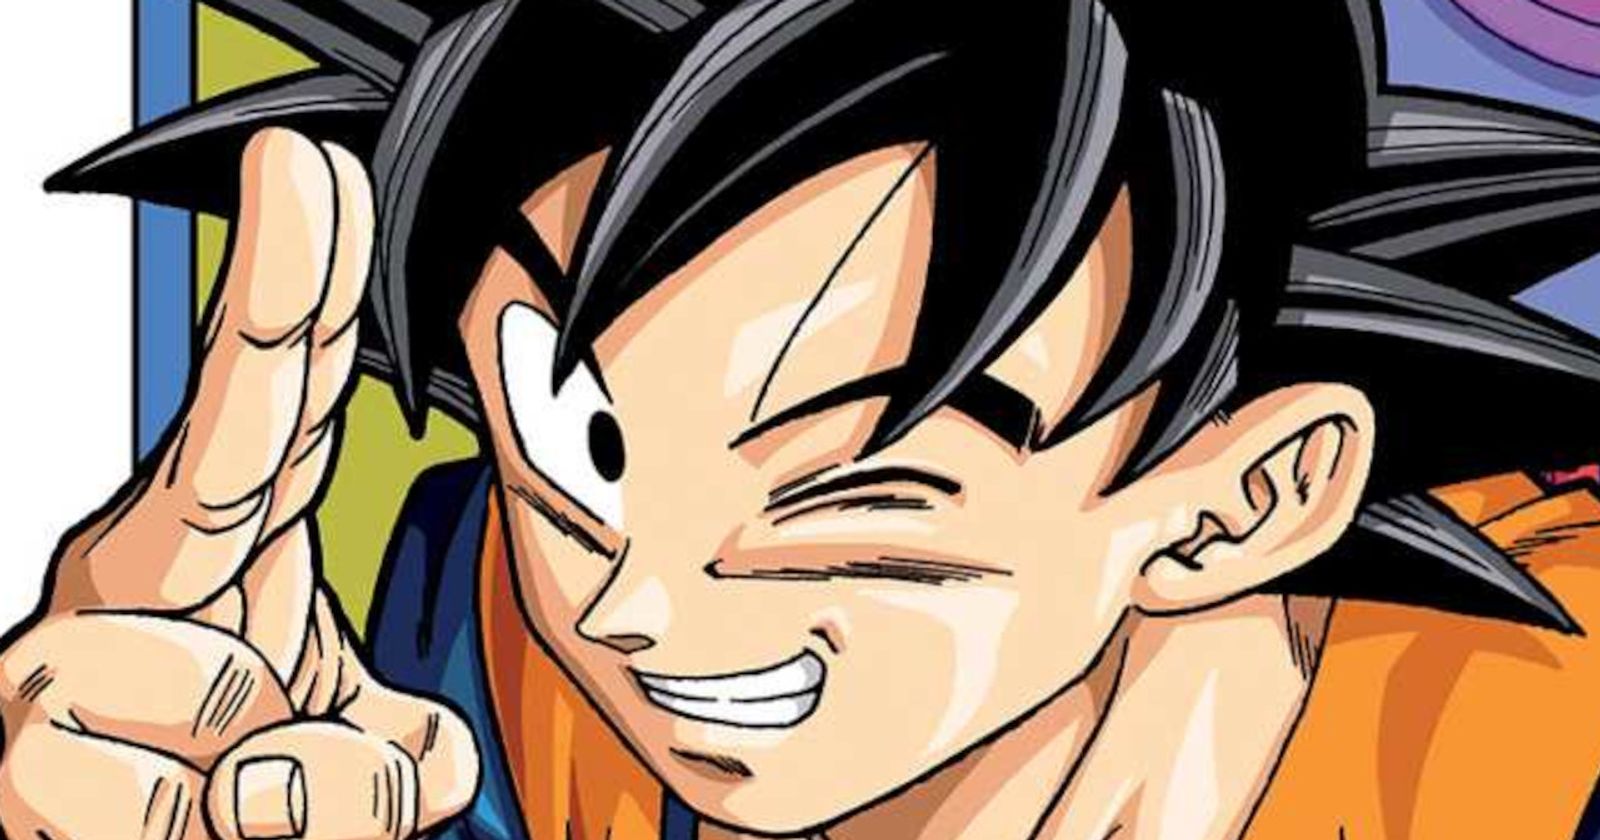 Dragon Ball Super Manga Returns With New Arc in December